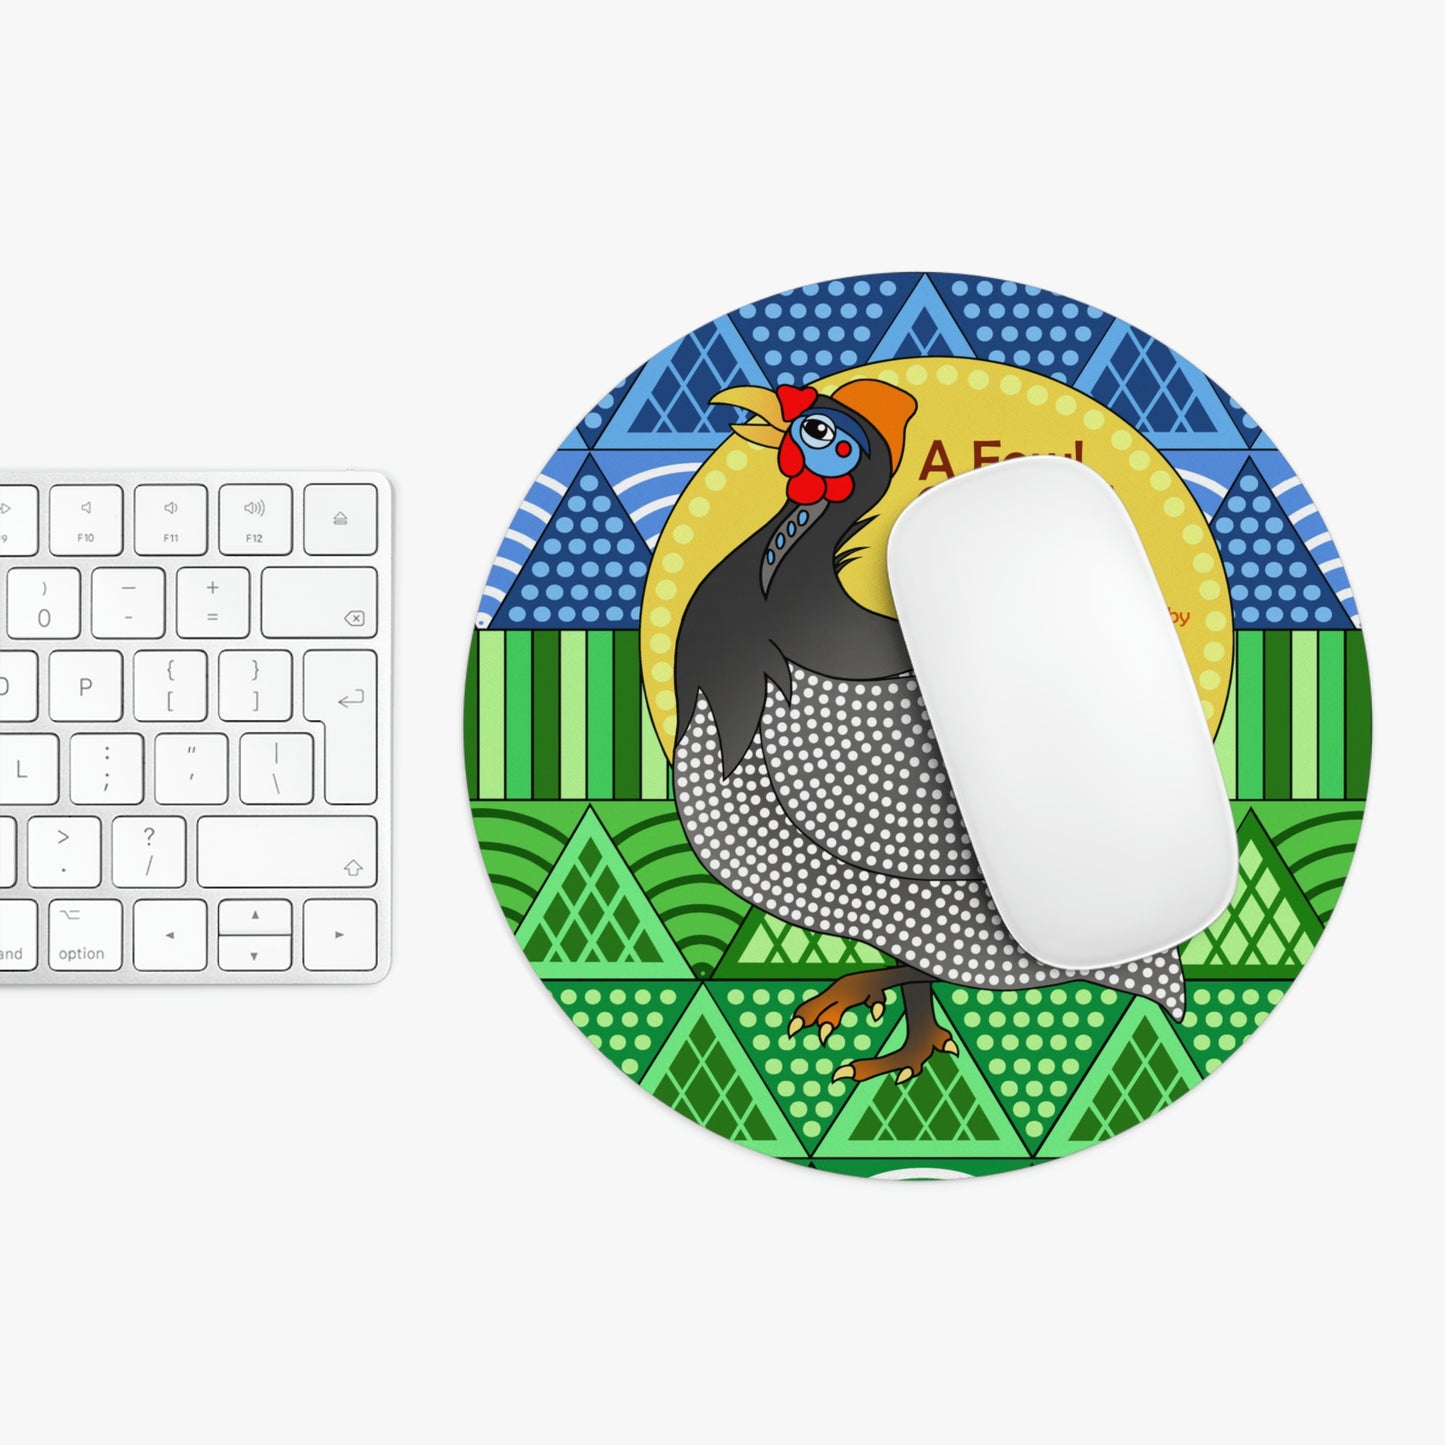 A Fowl Chain of Events Mouse Pad